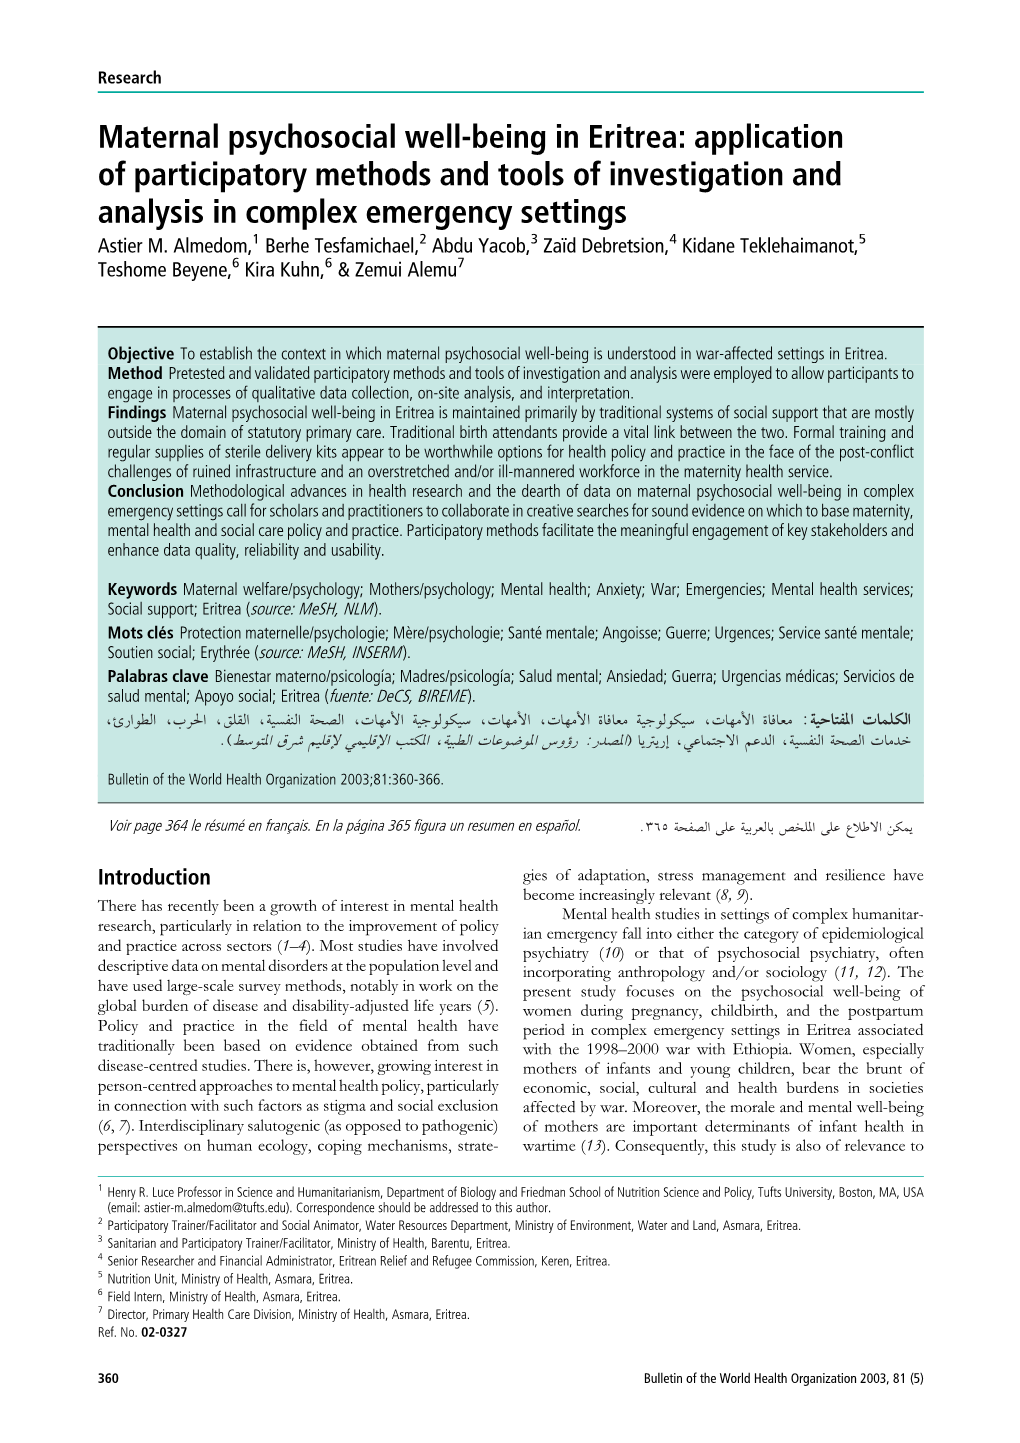 Maternal Psychosocial Well-Being in Eritrea: Application of Participatory Methods and Tools of Investigation and Analysis in Complex Emergency Settings Astier M